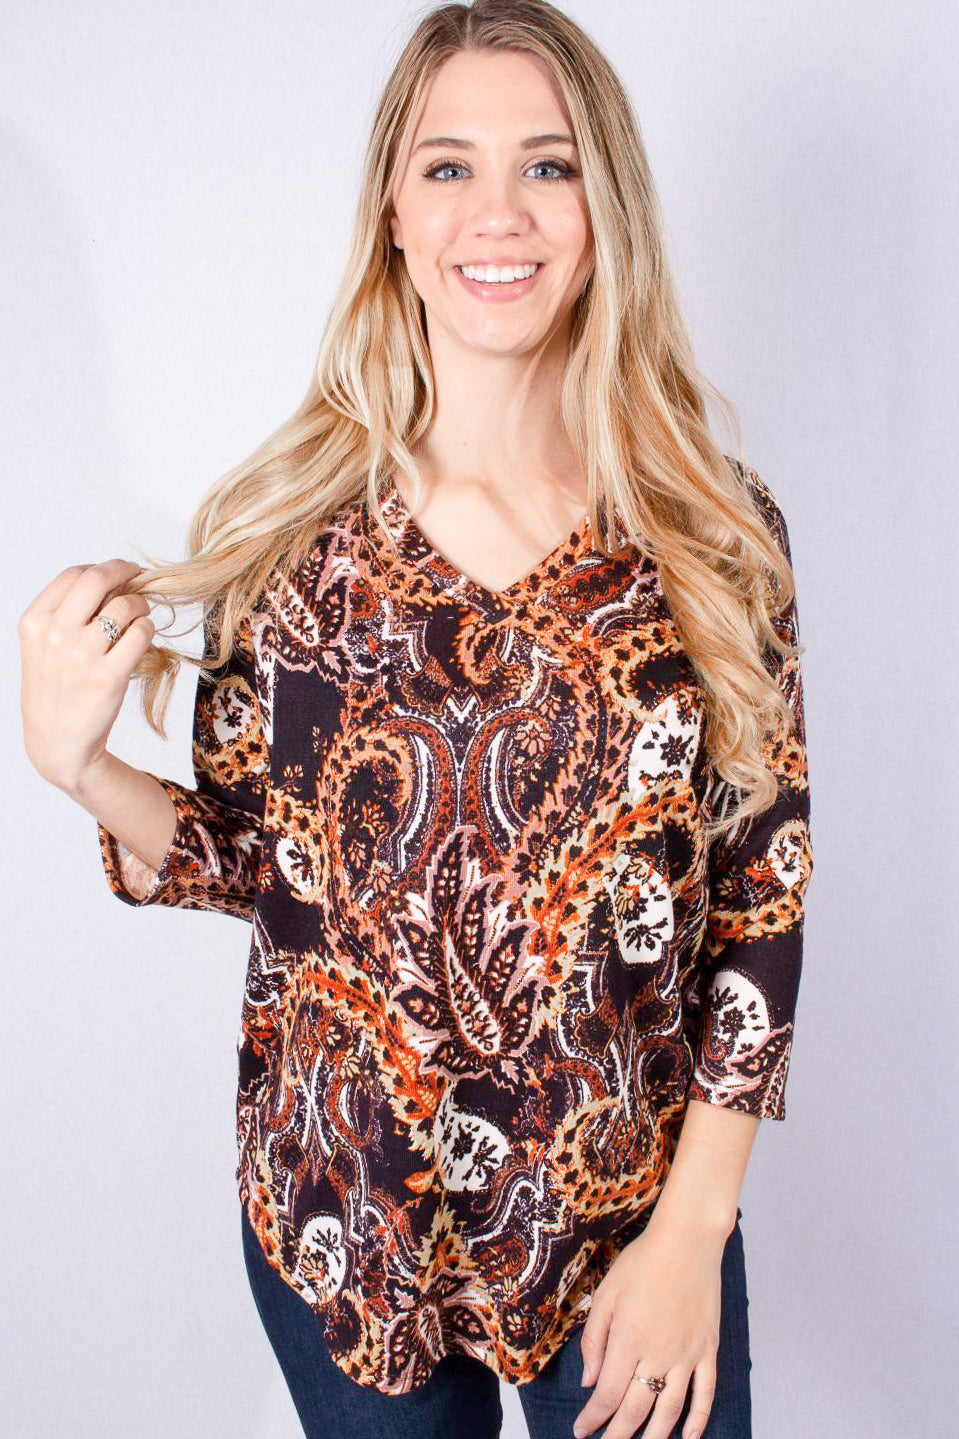 Women's 3/4 Sleeve V-Neck with Paisley Print Top